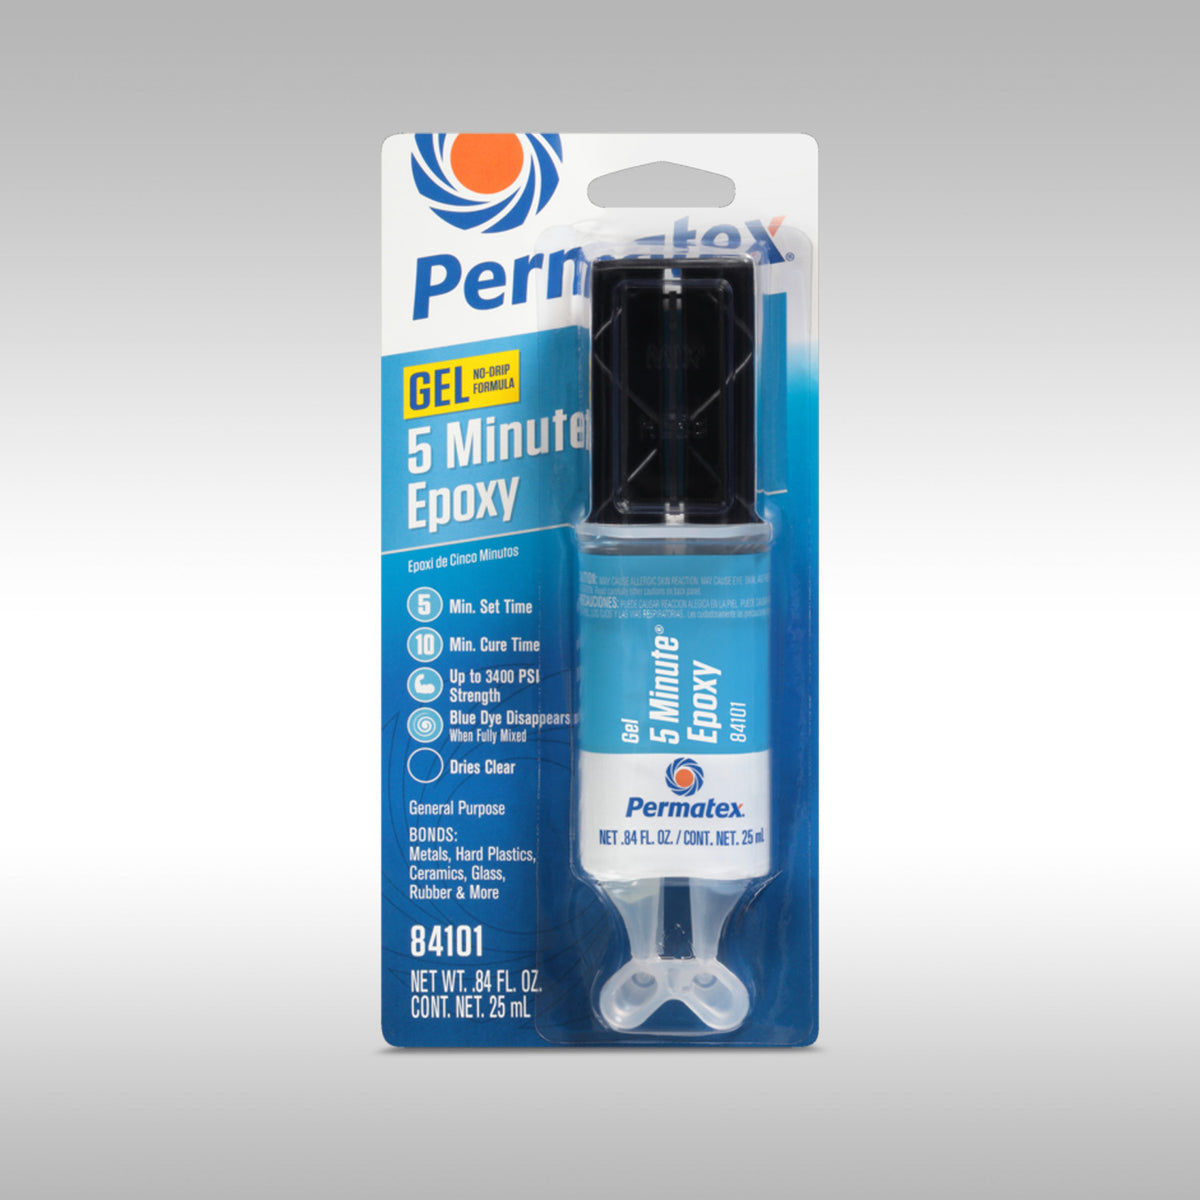 Permatex®s General Purpose 5 Minute Gel Epoxy provides the flexibility to reposition before the setting time. The fast setting, two-part adhesive and filler system is specially formulated with a Blue Dye Indicator that disappears when it’s fully mixed and ready to use.